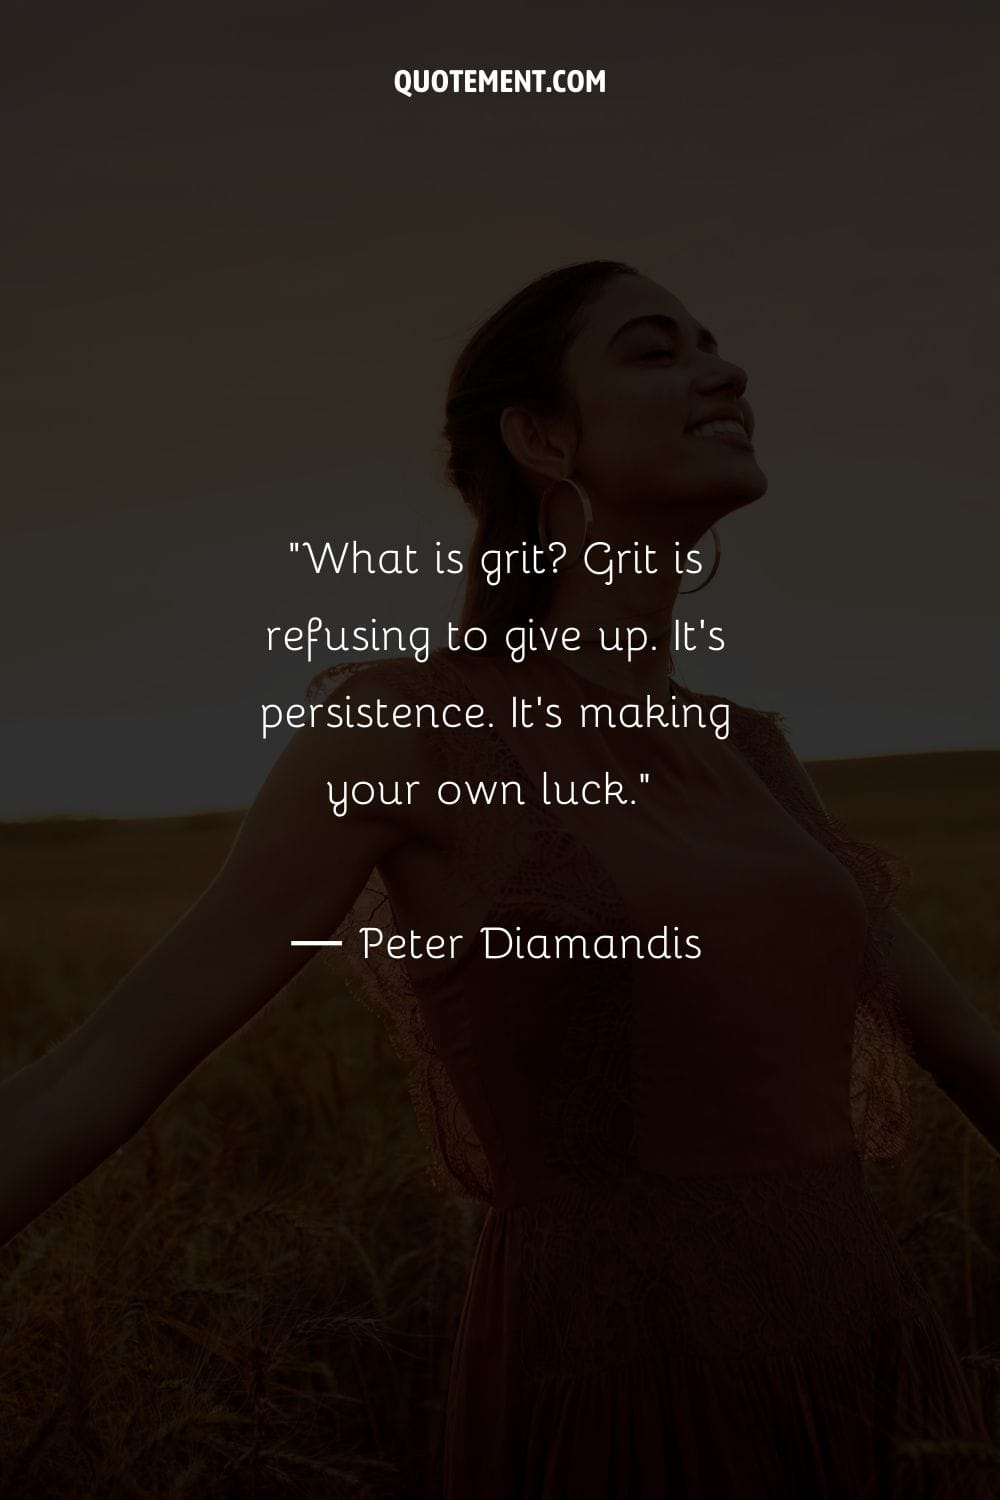 What is grit? Grit is refusing to give up. It’s persistence. It’s making your own luck